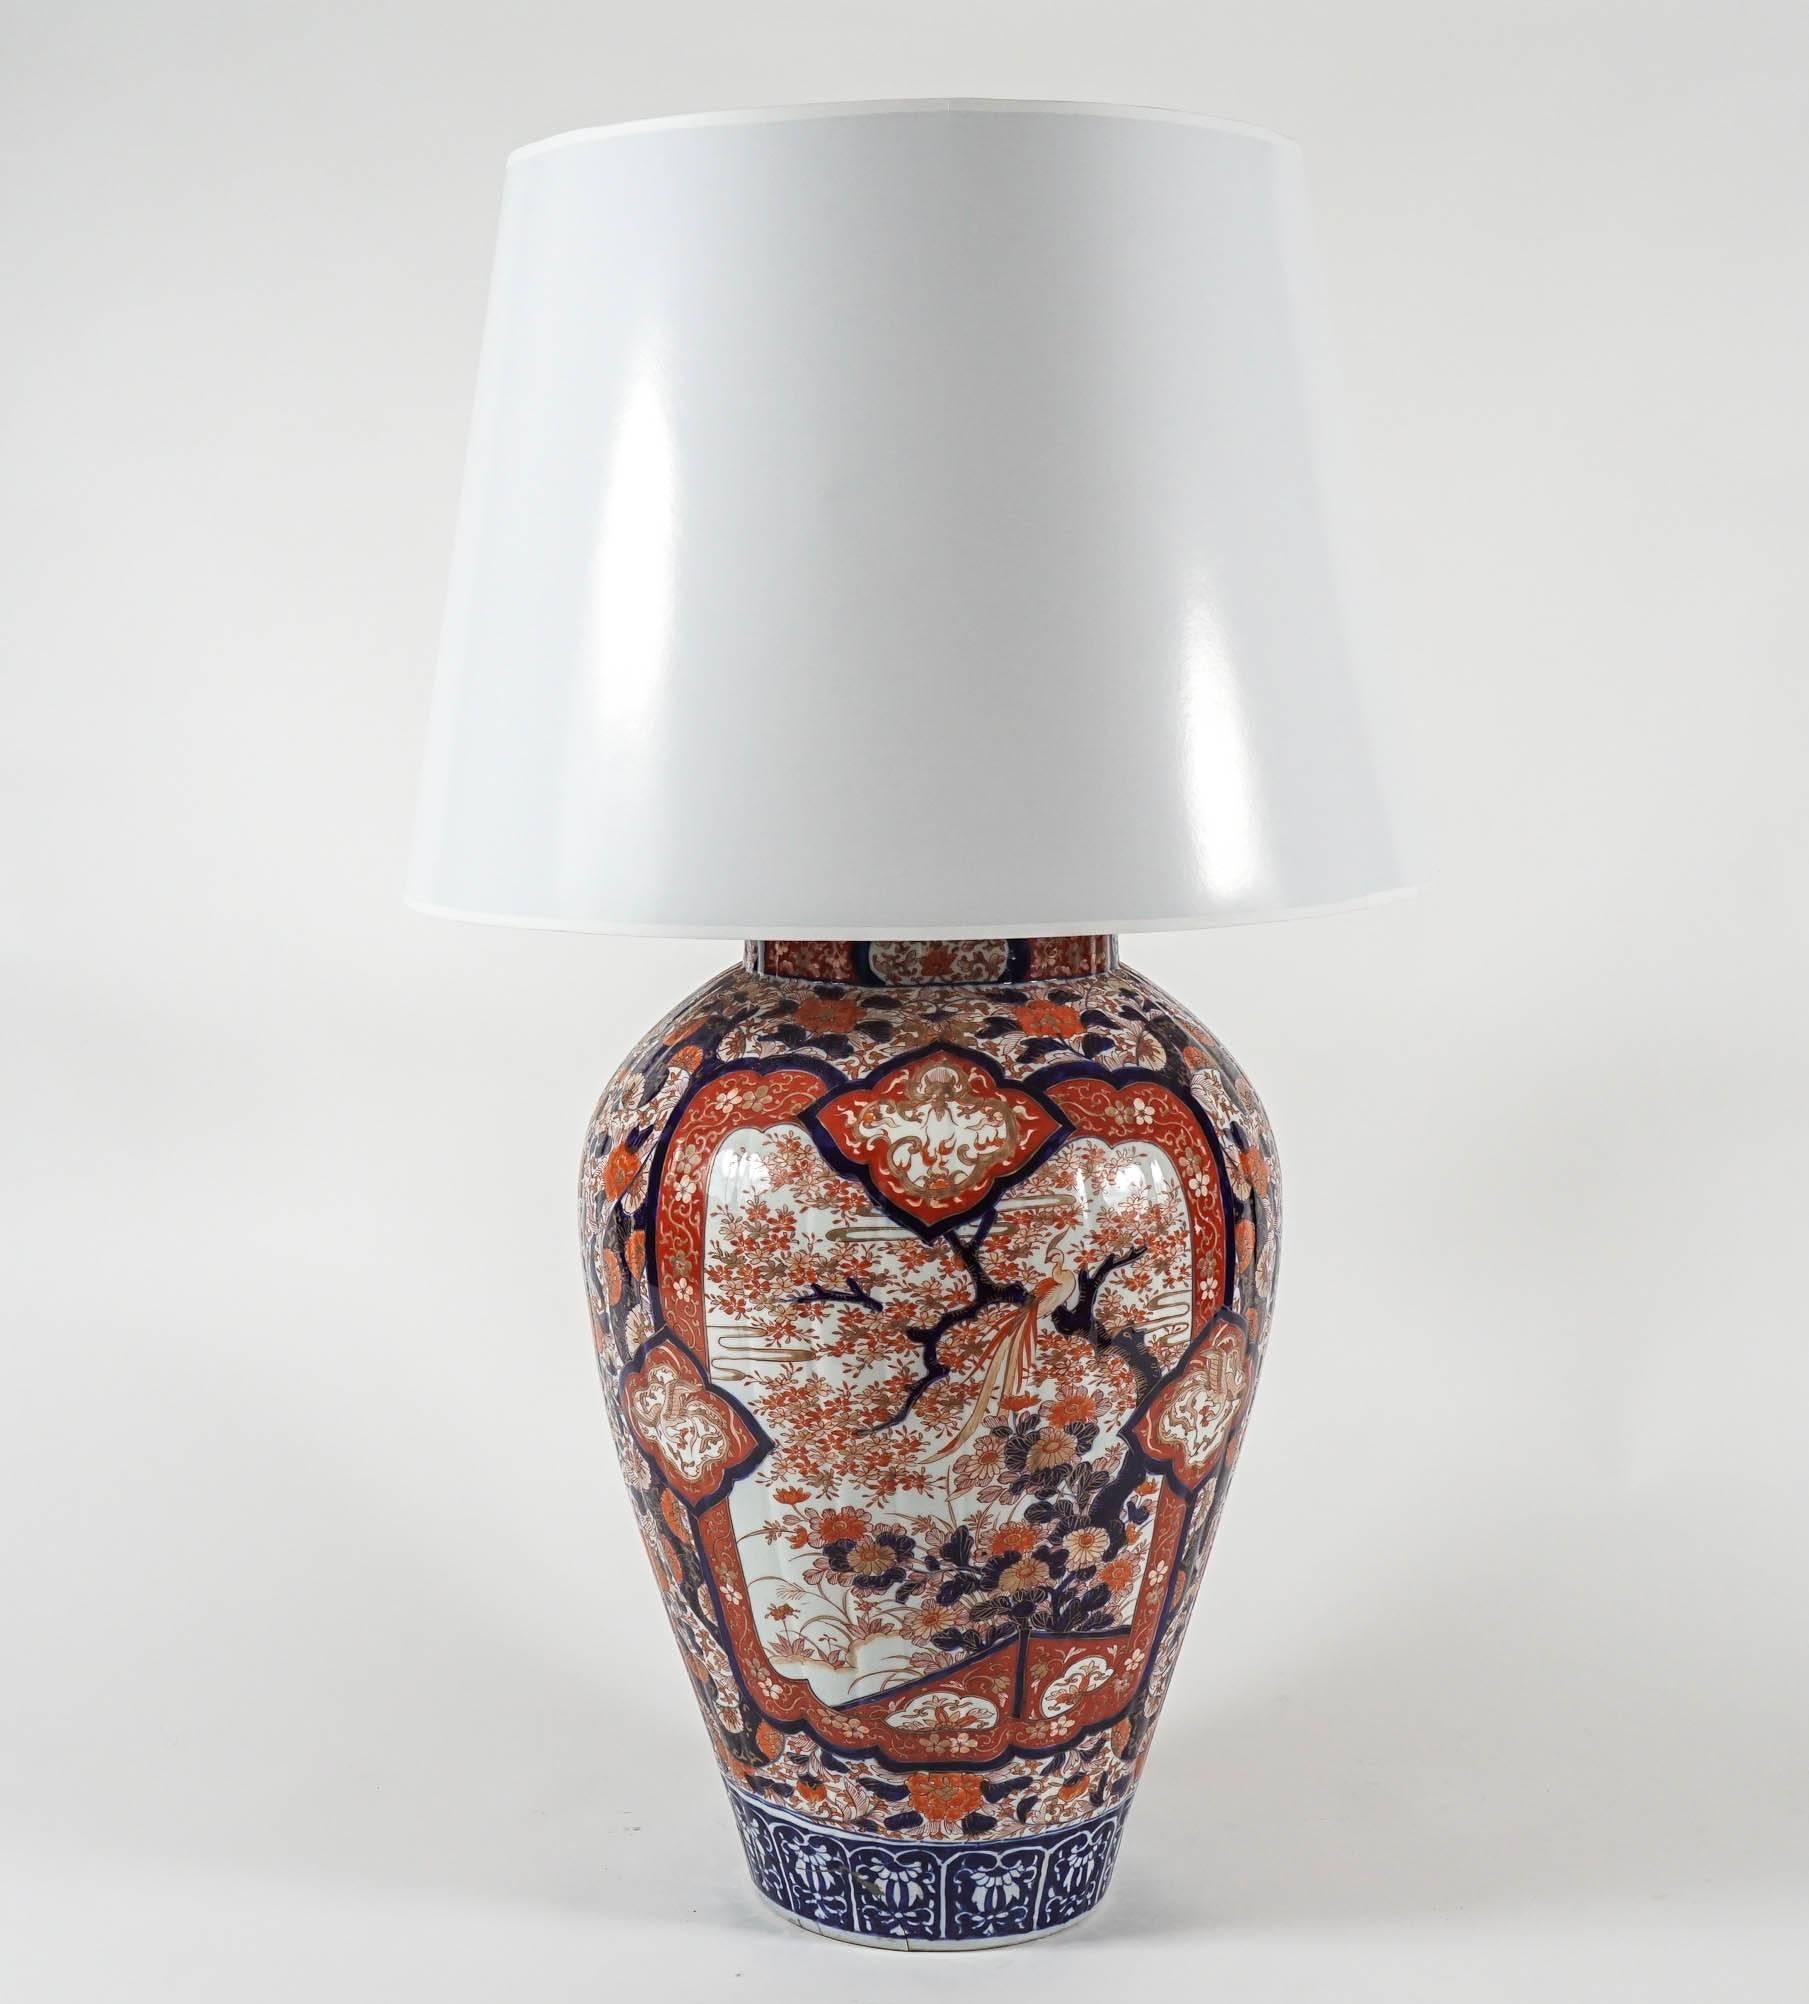 Circa 1880 Japanese Imari 'palace' vase of large scale converted to a table lamp. Measurements given are overall. Vase alone measures: 17